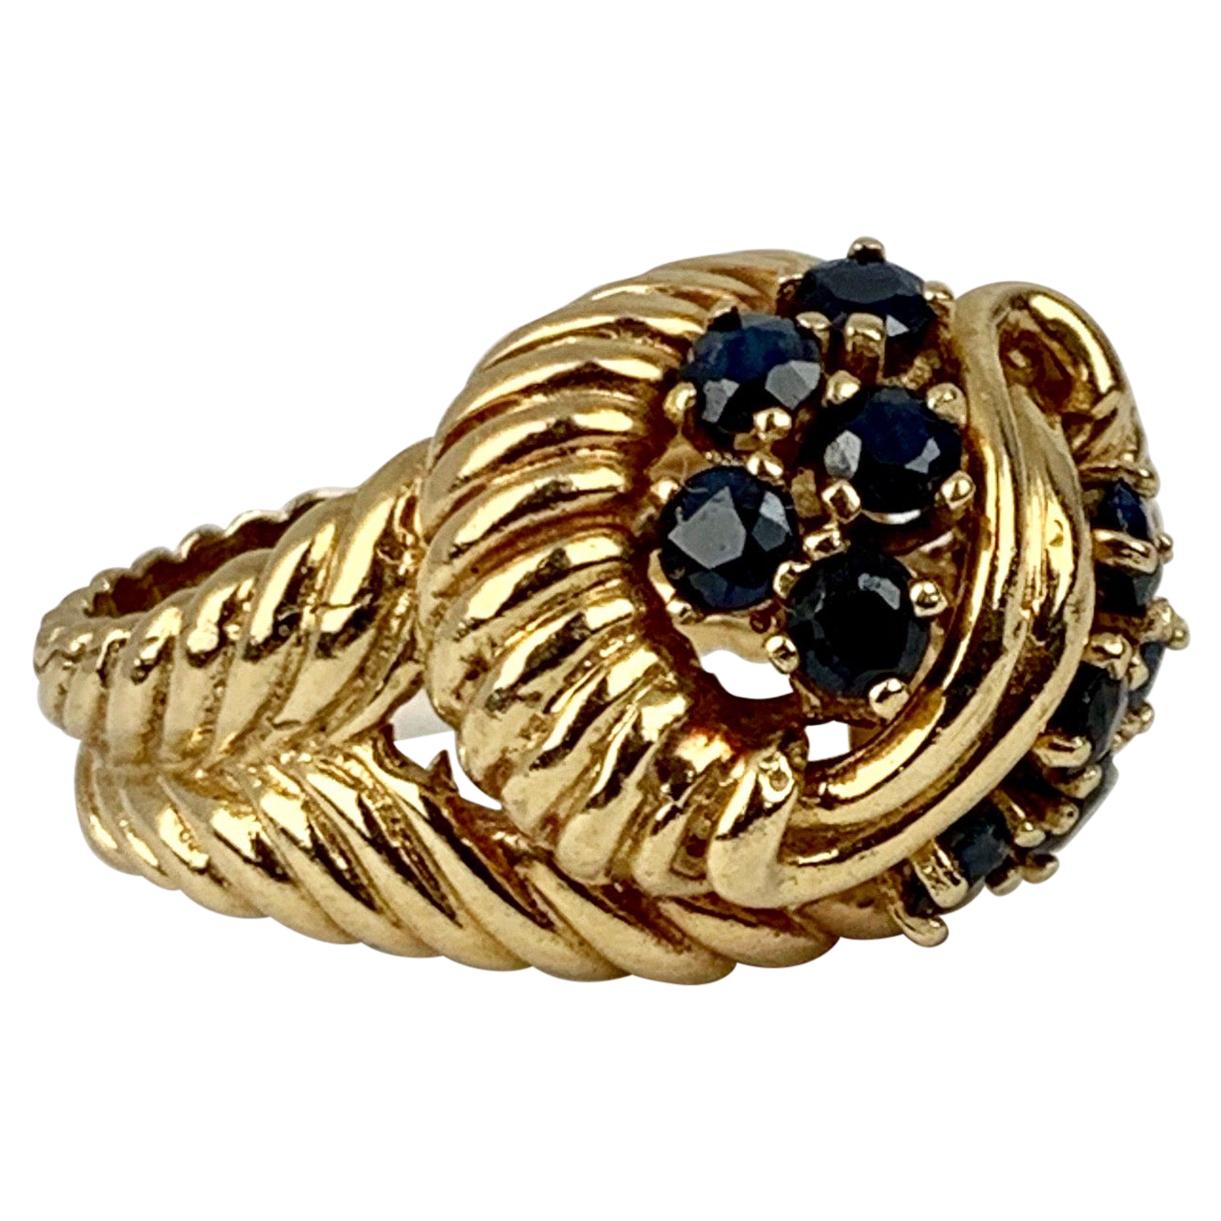  Shrimp Style Gold Ring with 10 Round Faceted Sapphires, 14 kt y.g. For Sale